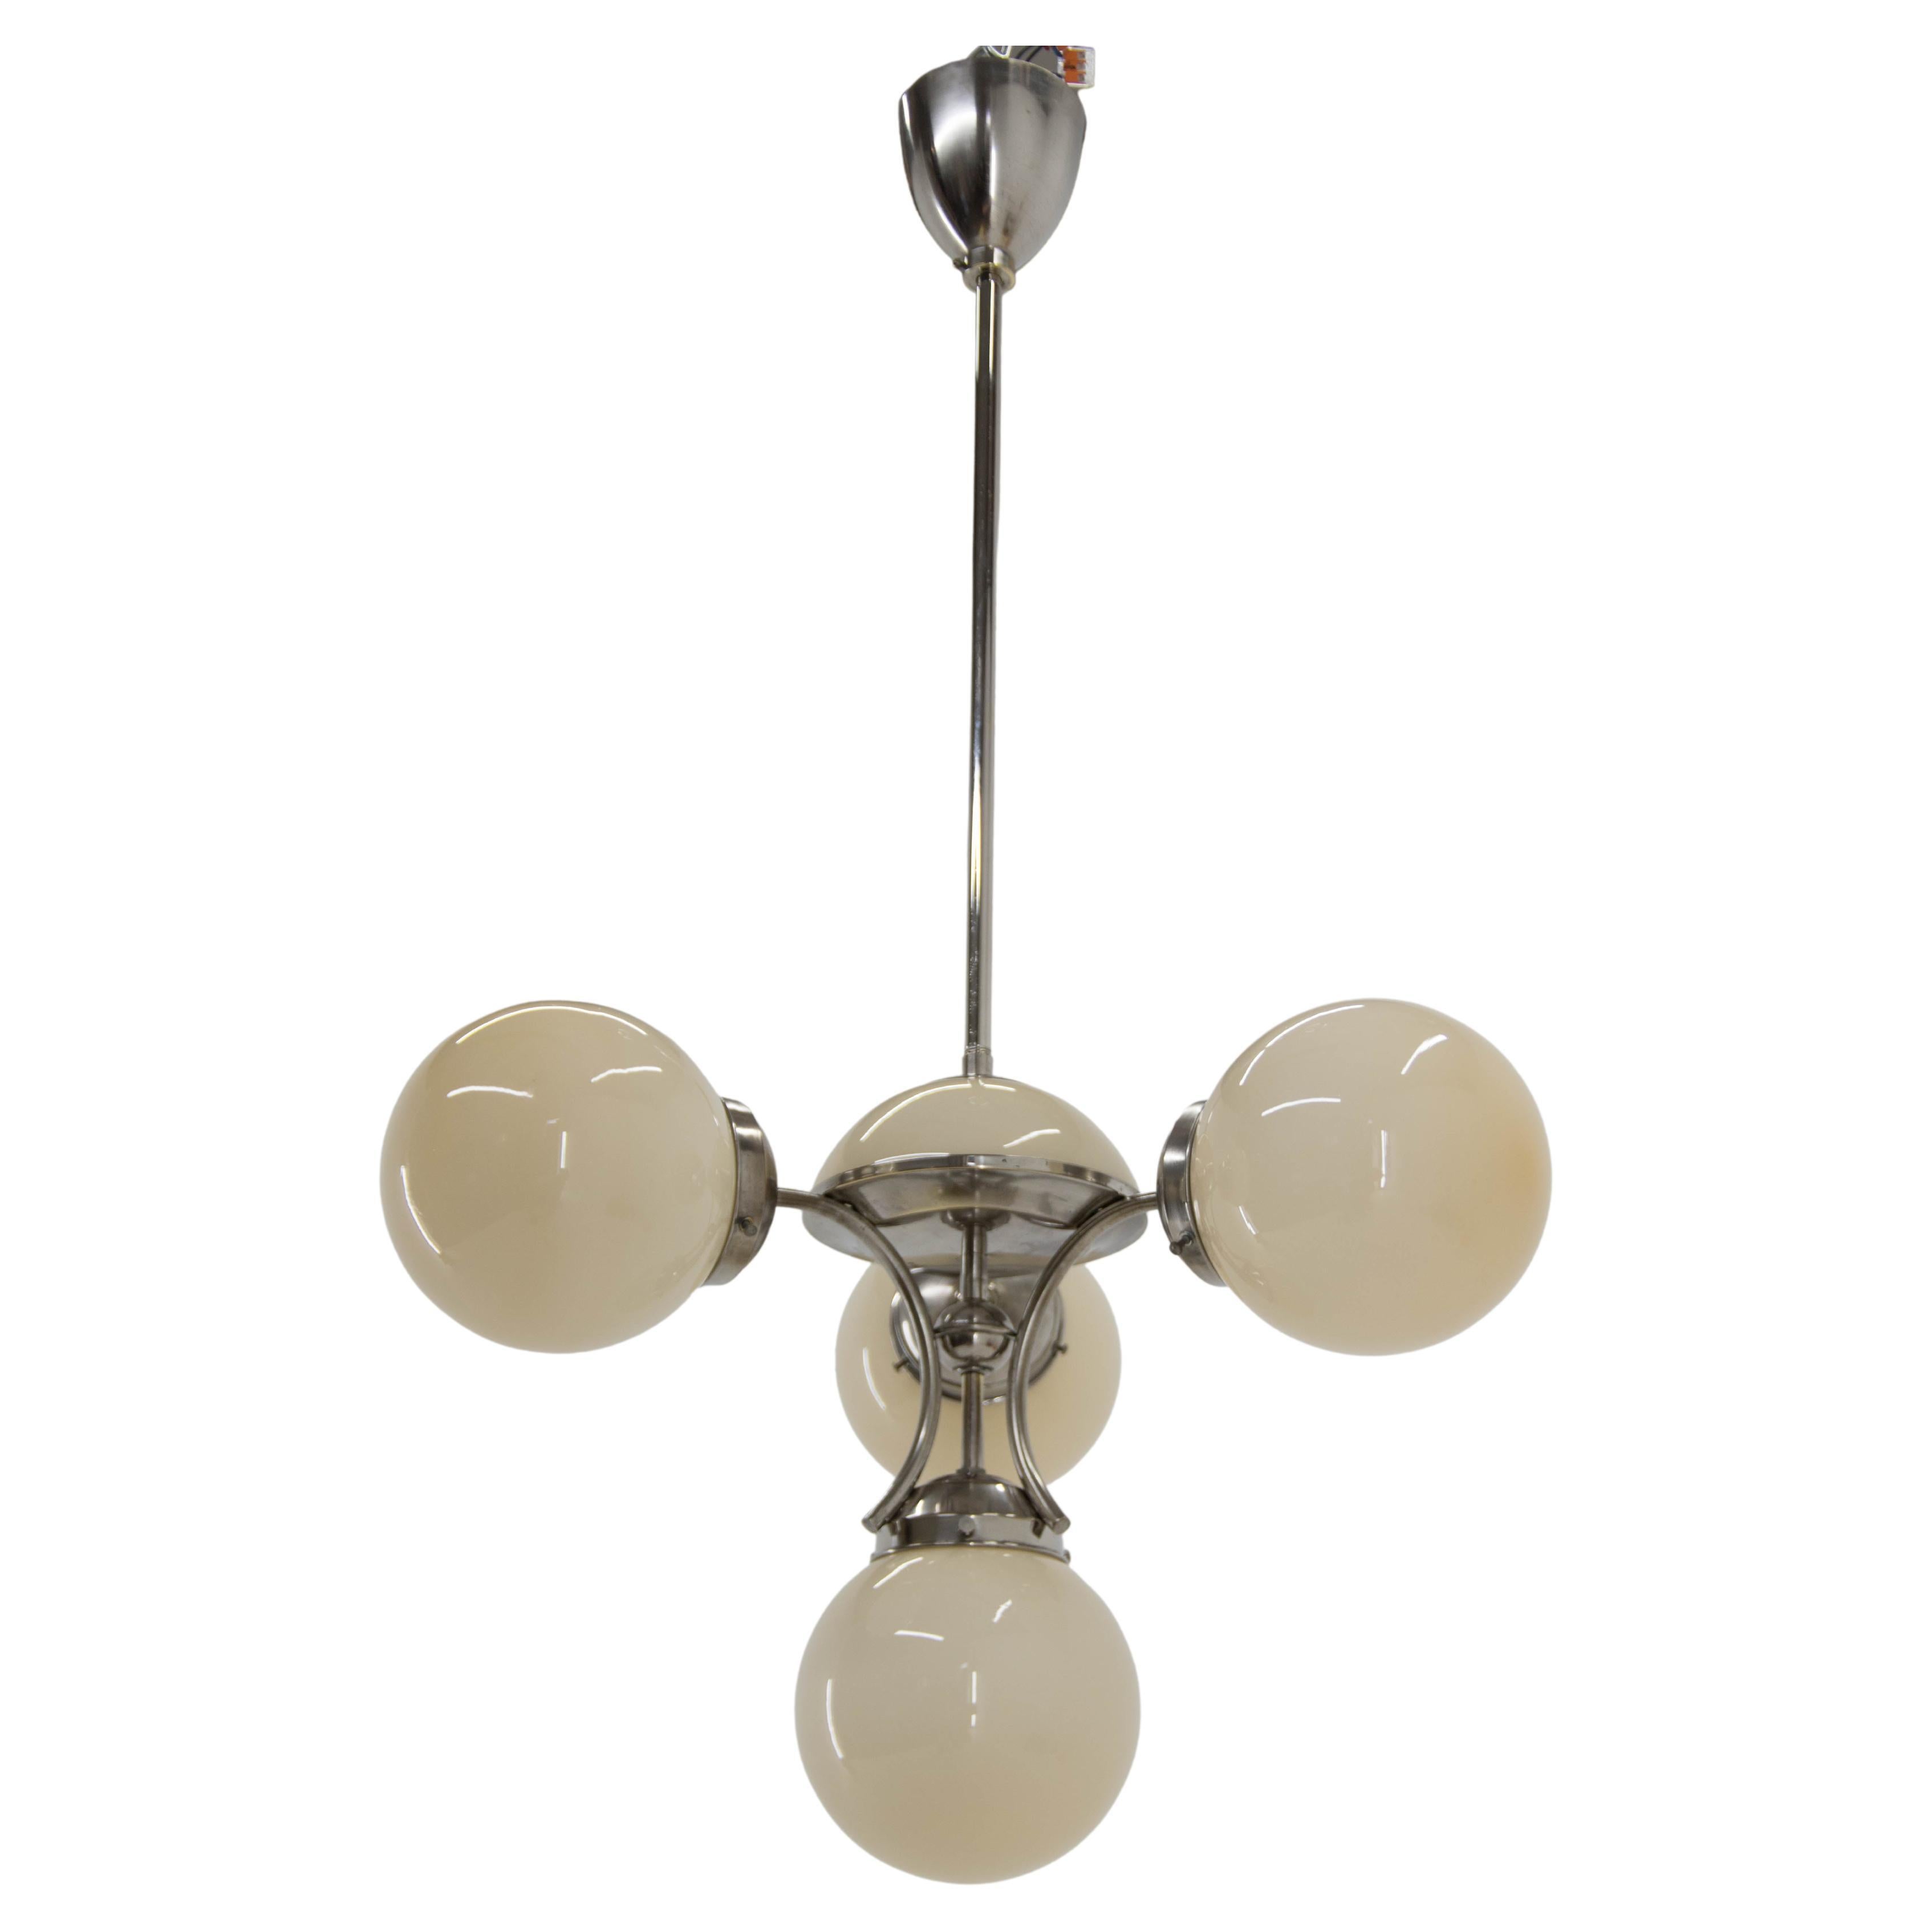 Unique Art Deco Nickel and Glass Chandelier, 1930s For Sale